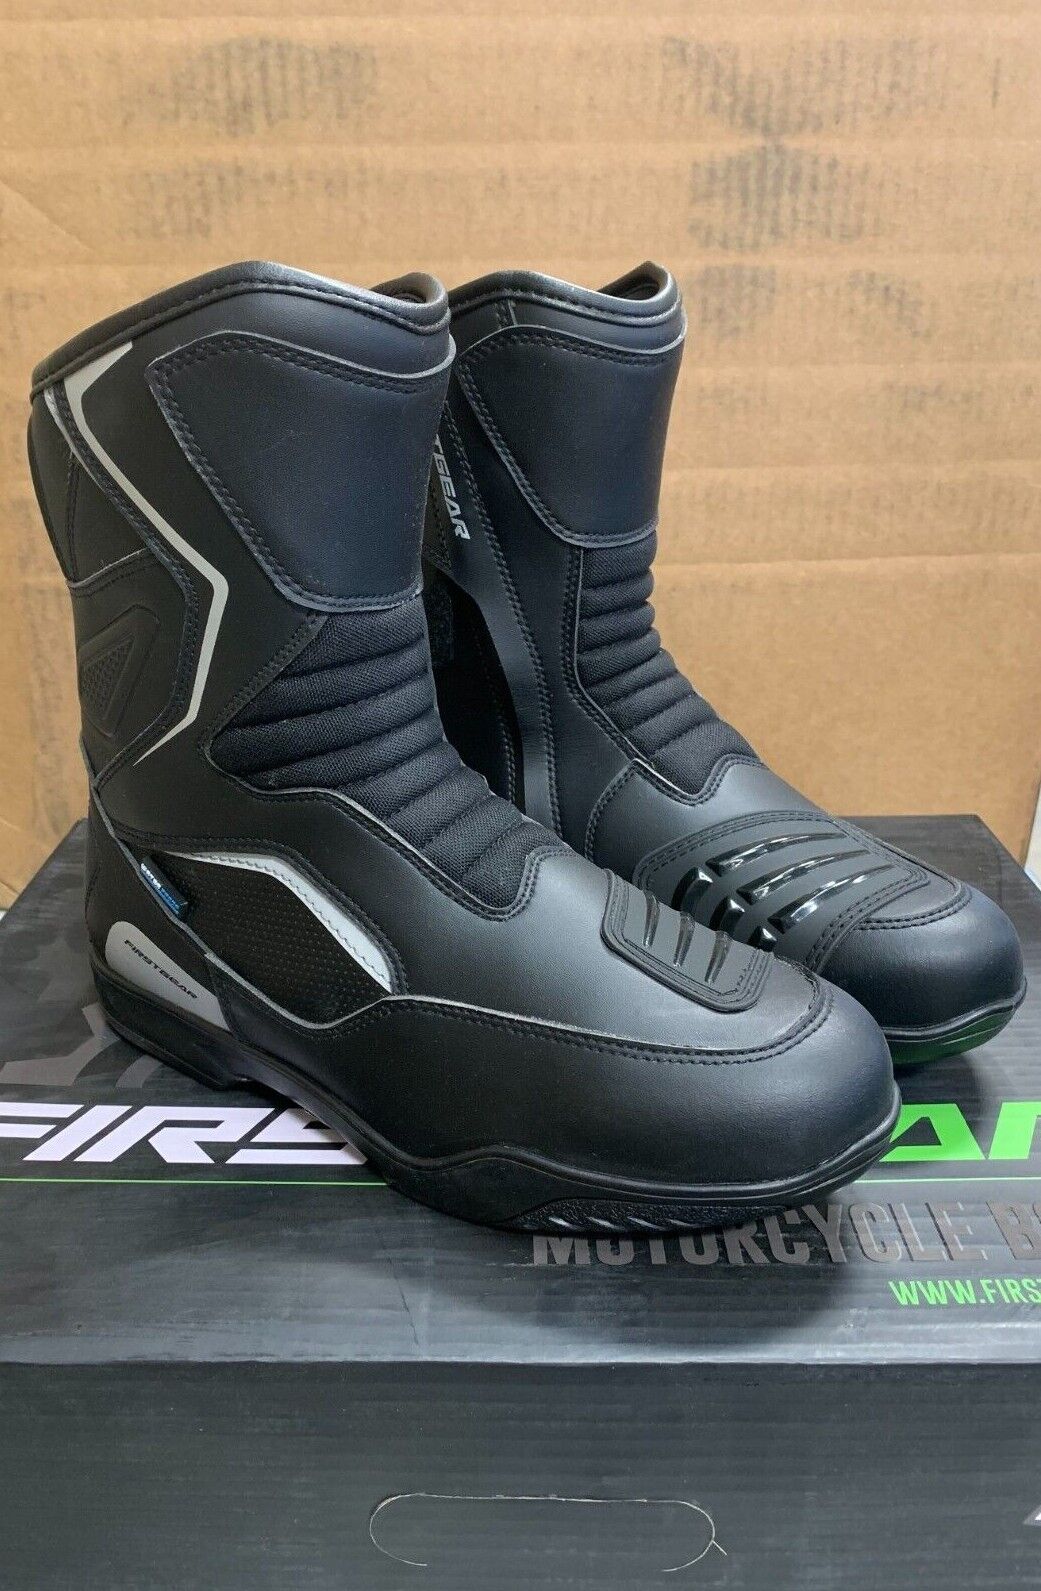 FirstGear Big Sky Black Motorcycle Riding Boots Men's Sizes 9, 11, 12 *Open Box*